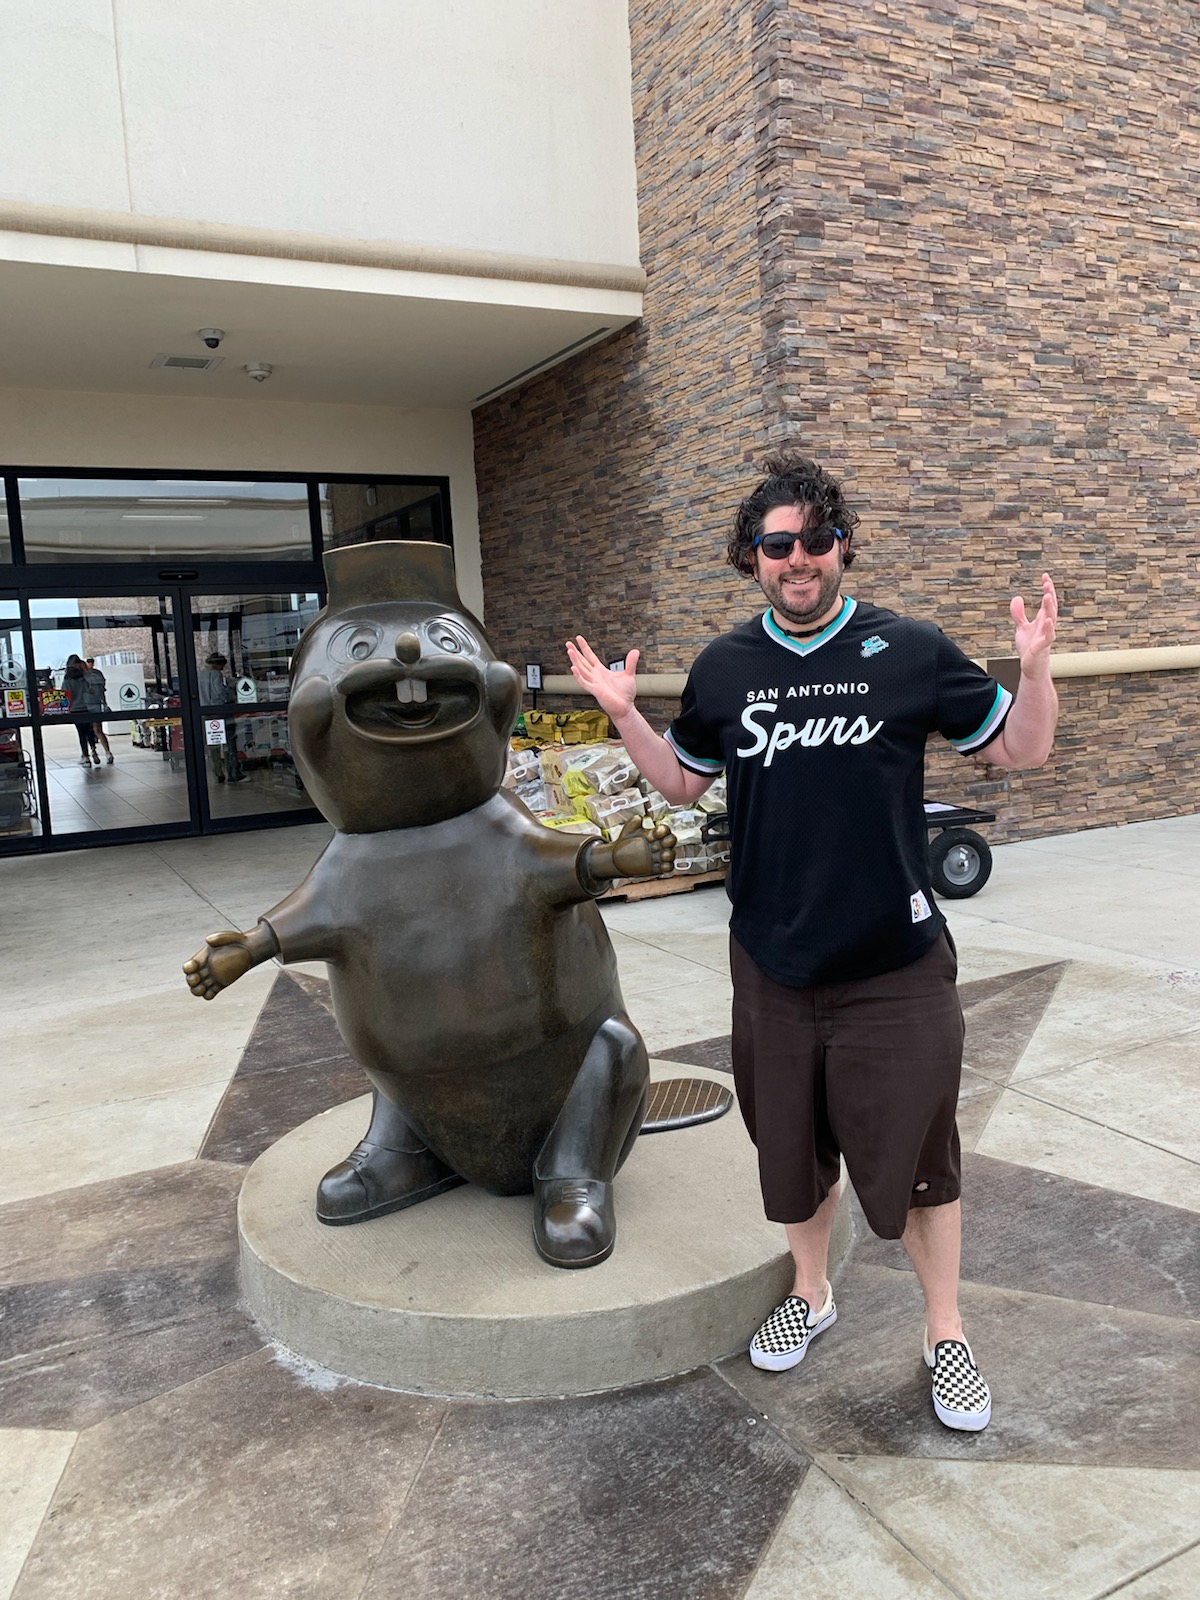 Lee shrugs at/with Buc-ee's in Texas (Pre-Covid).